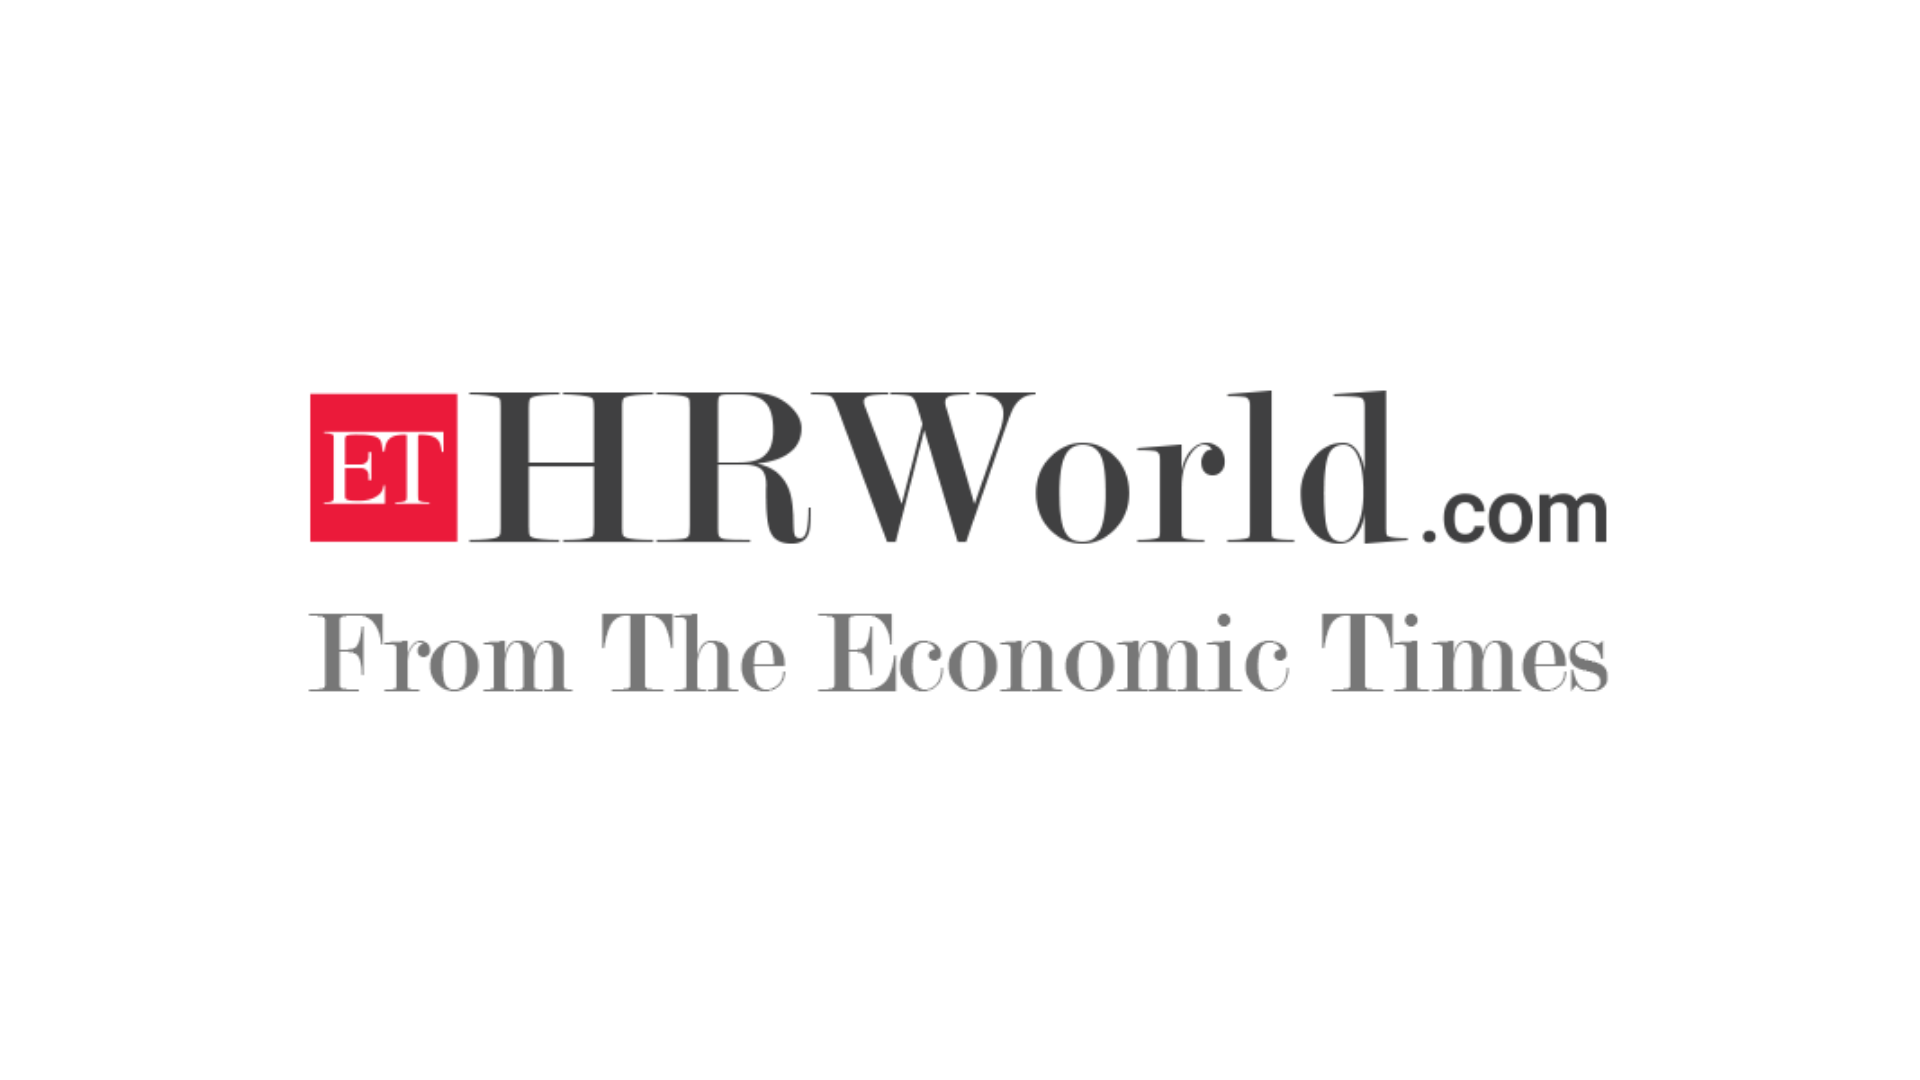 ETHRWorld: Smart WFM reveals its global expansion plan; appoints Rob Scott as Chief Operating Officer